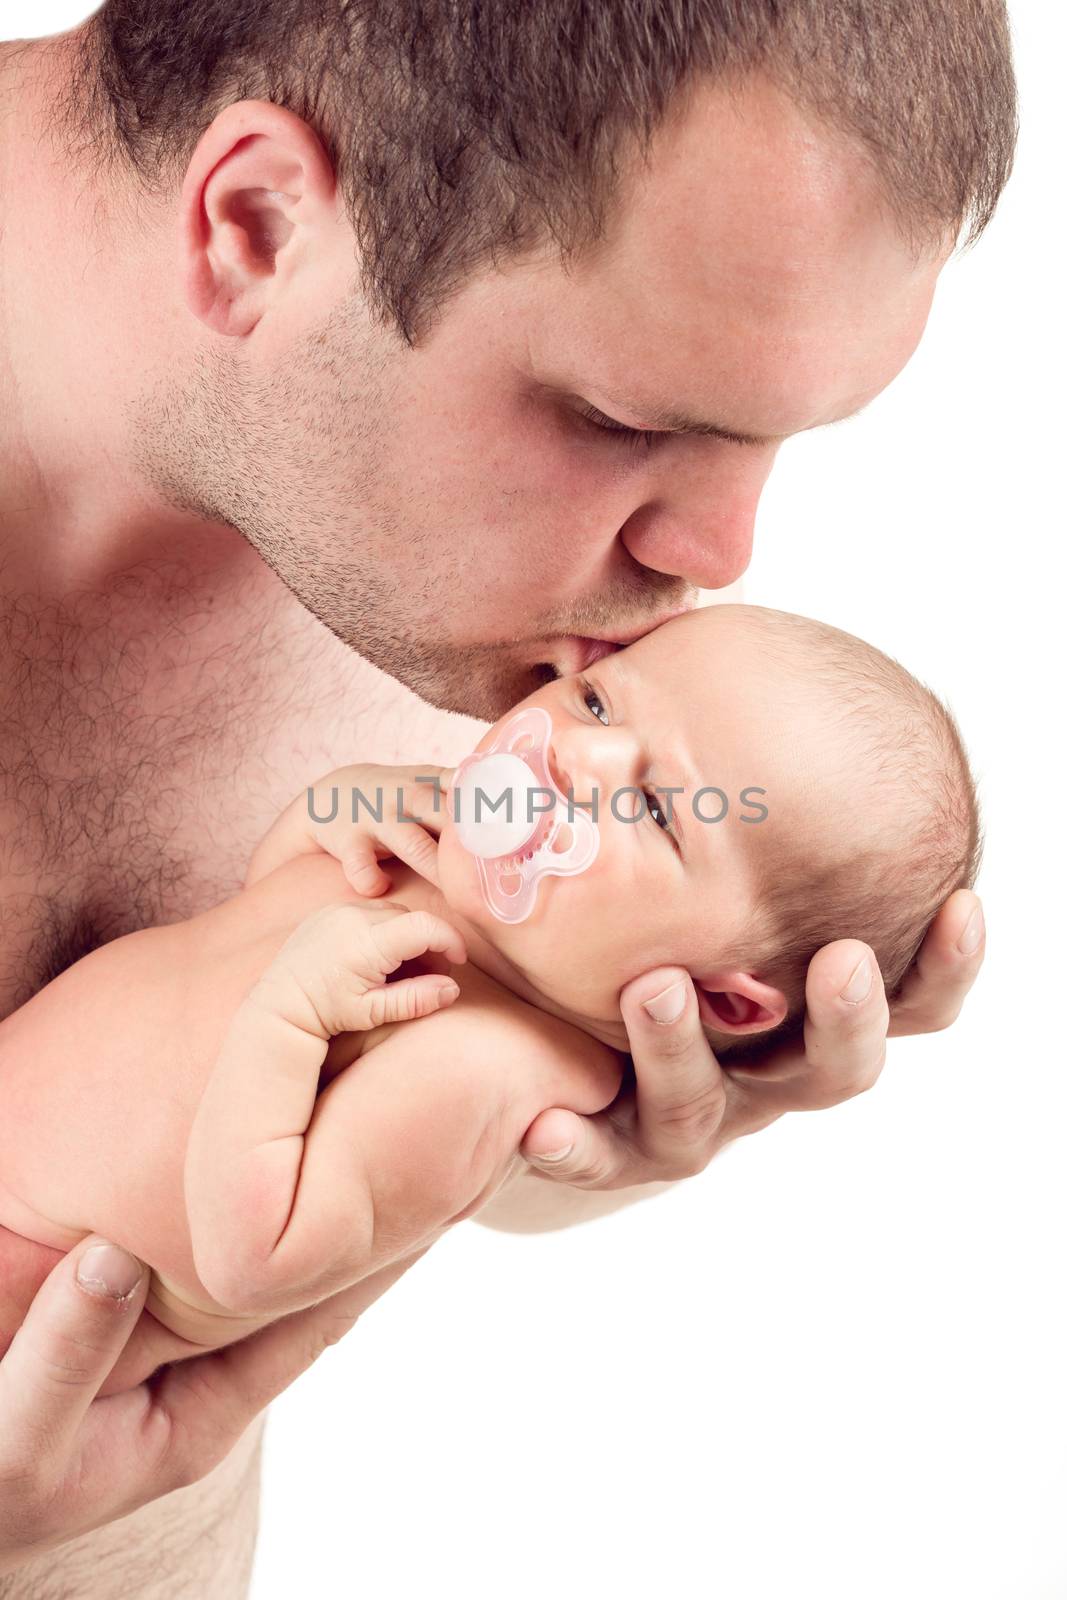 Loving father kissing his baby cute little girl, first month of the new life, isolated on white